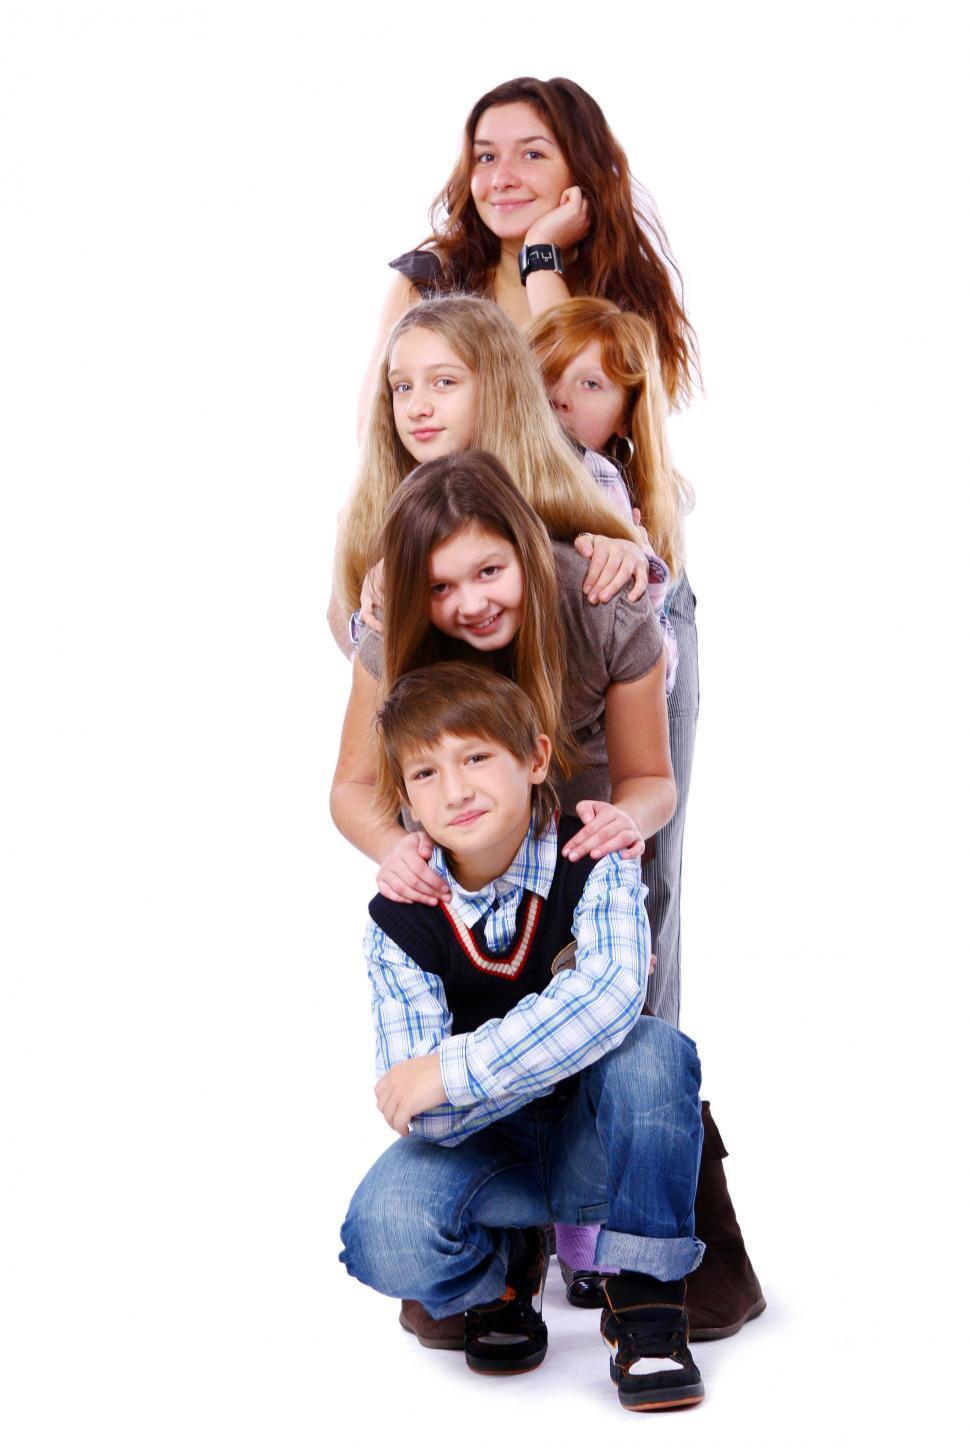 Free Image of Group of cute and happy kids posing on white in a stack 